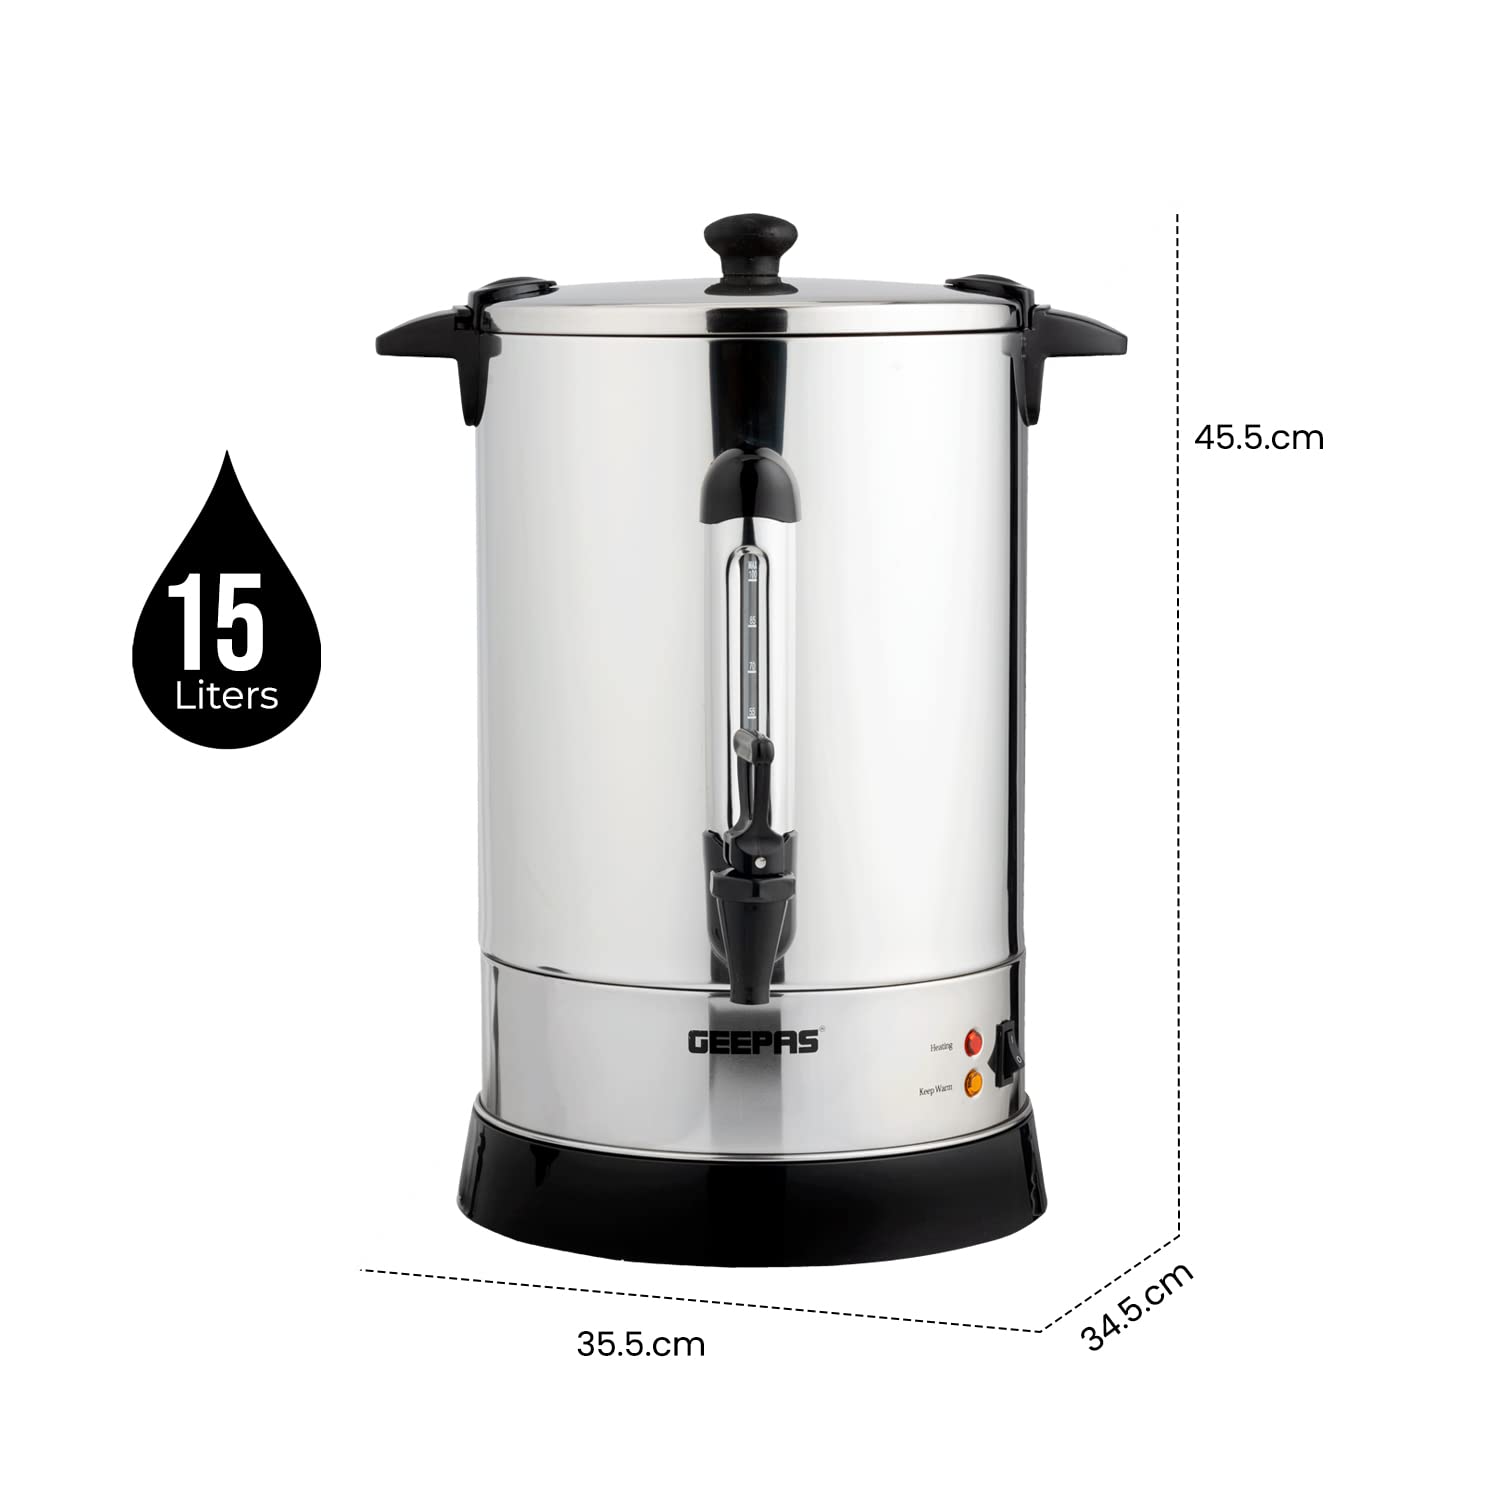 Geepas S/S WATER BOILER Kettle 1650W - Stainless Steel Hot Water Dispenser With Automatic Temperature Control & Keep Warm Function - 10L ,Silver/Black gk6155